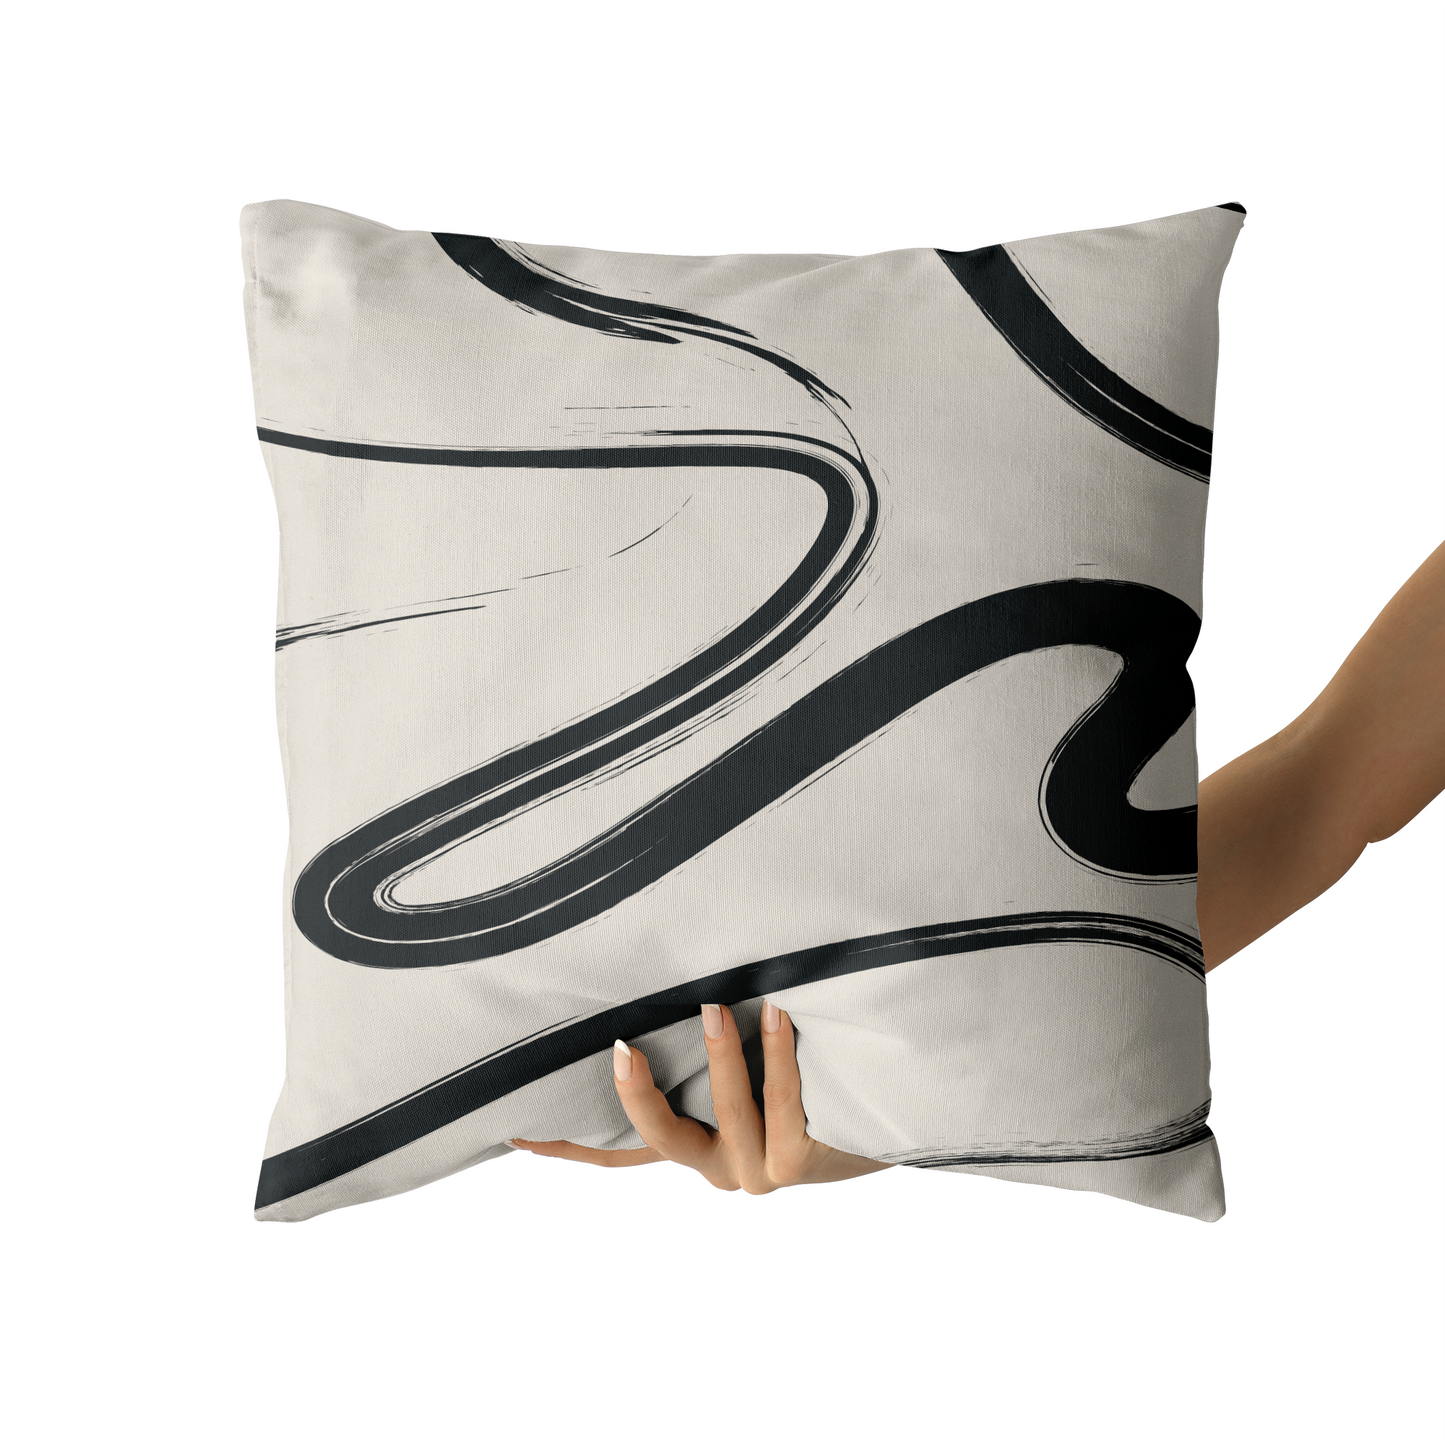 Painted Expressionism Pollock Inspired Throw Pillow